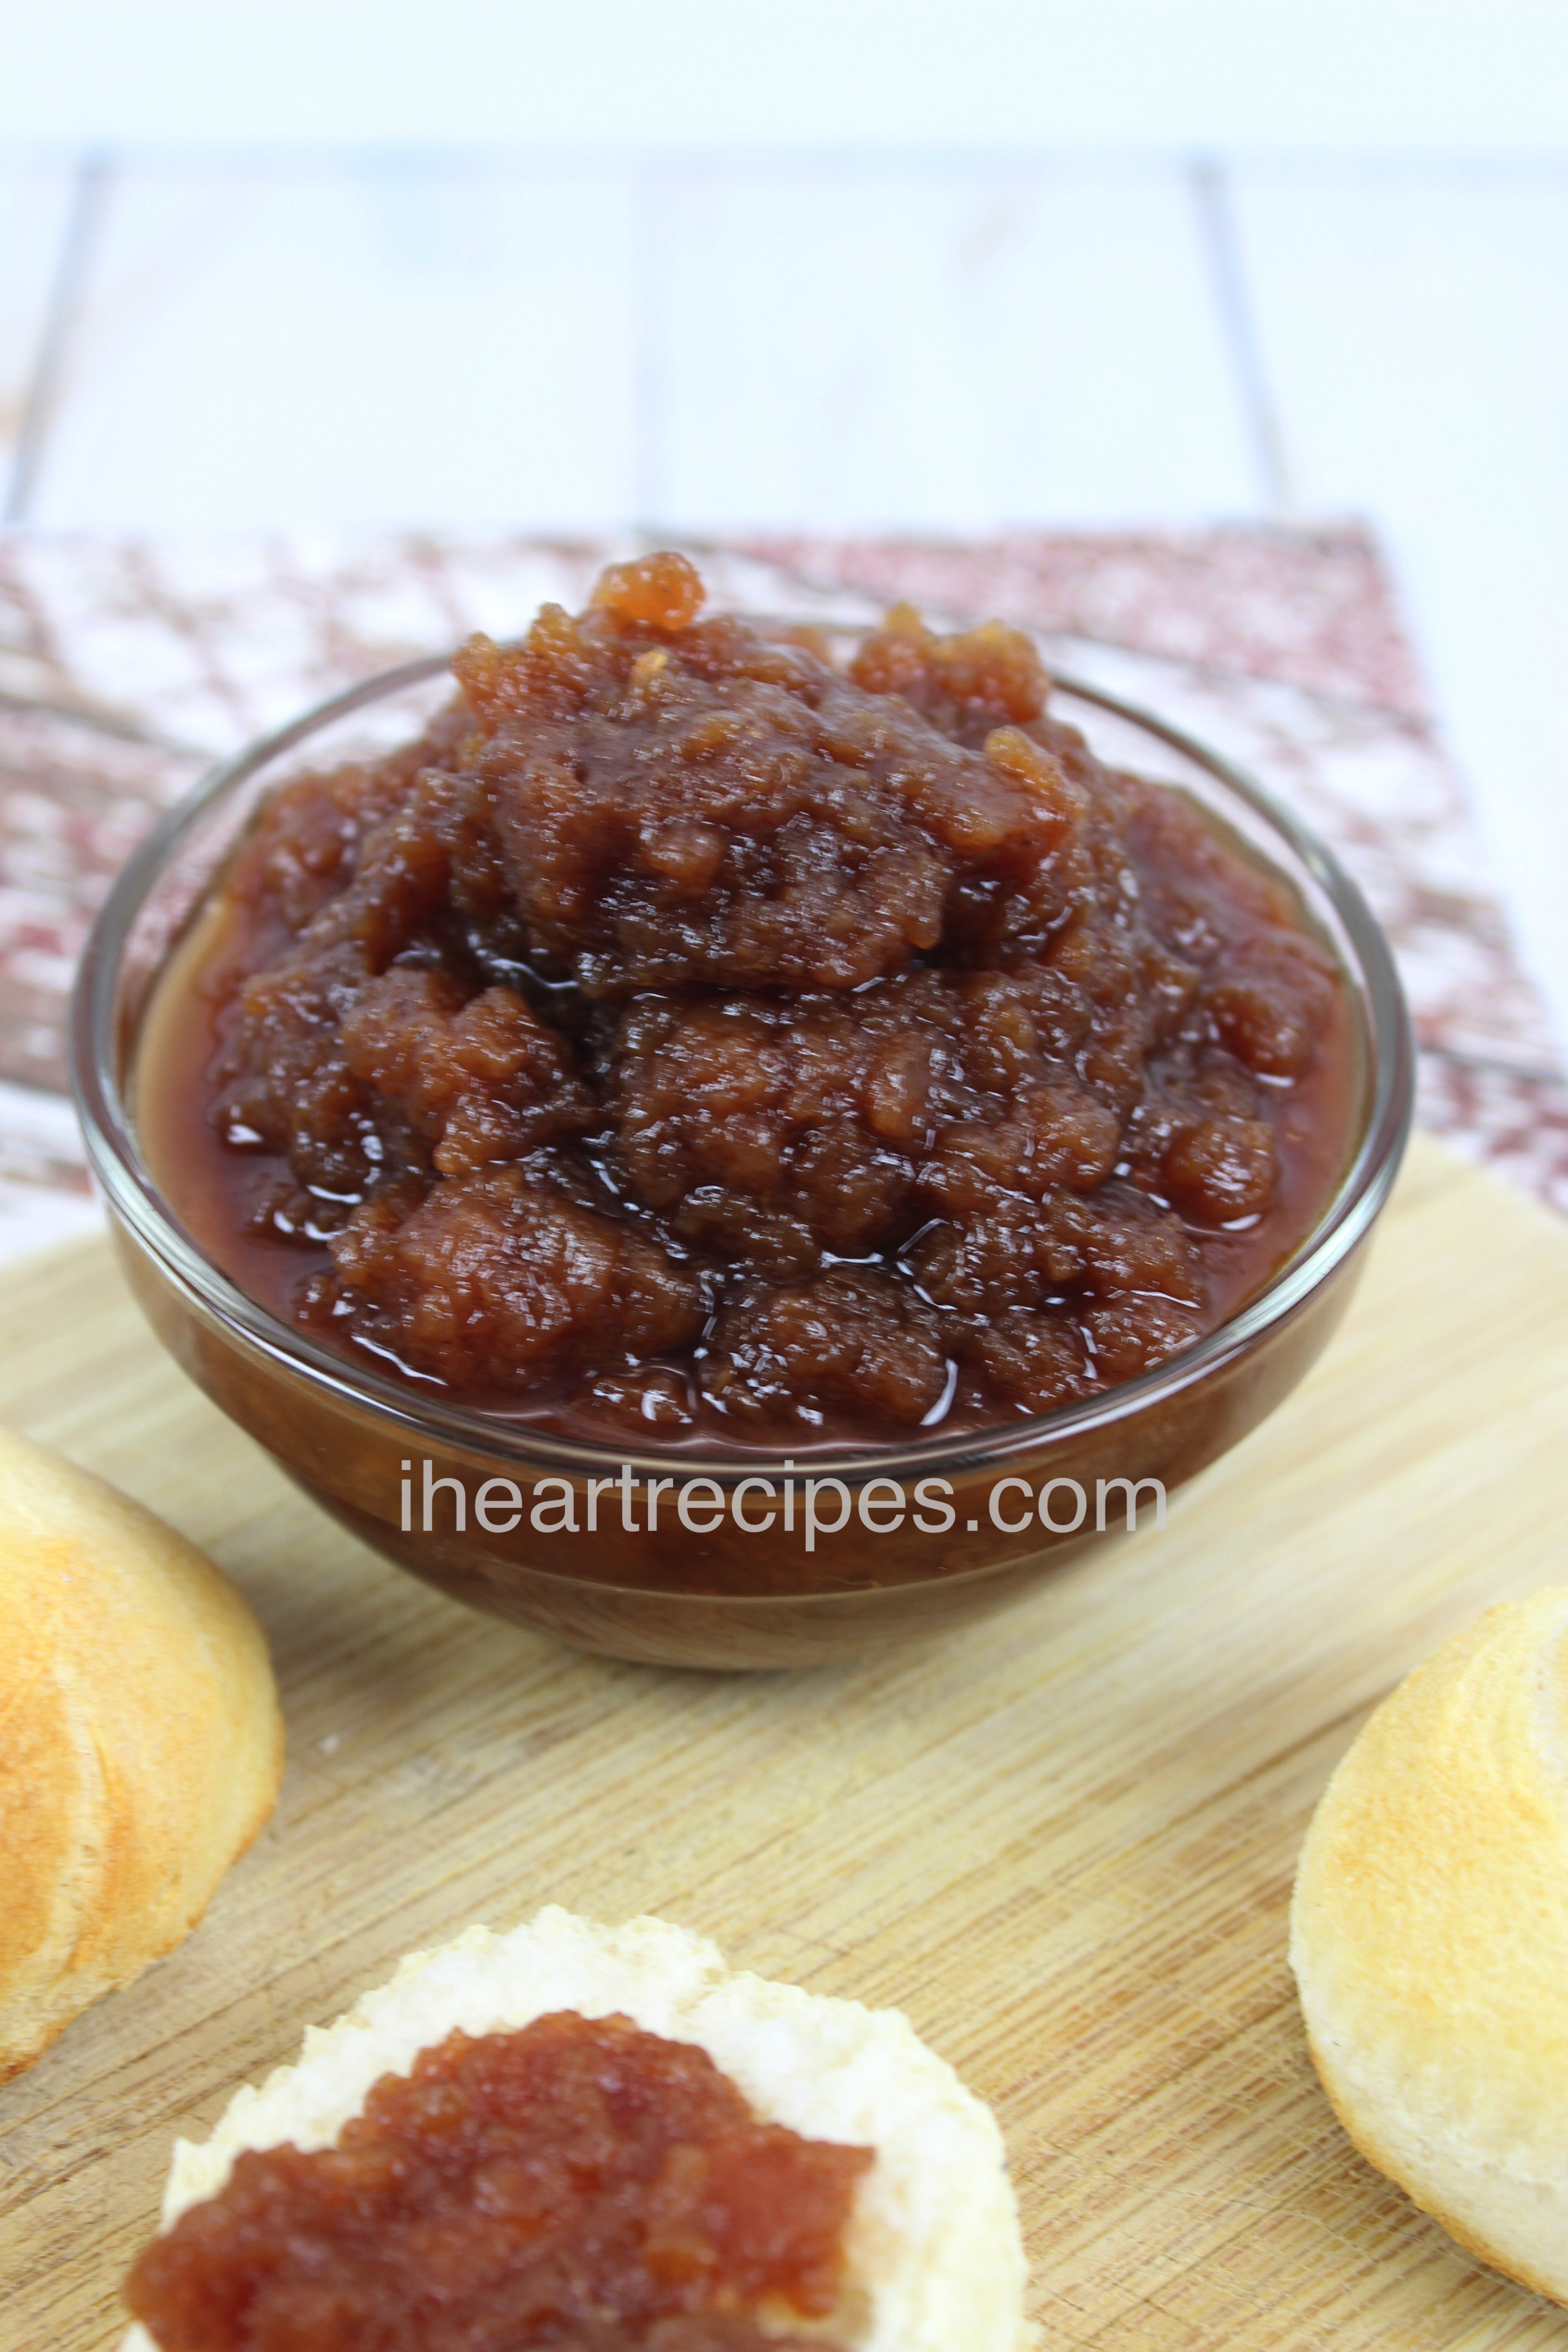 This easy recipe for slow cooker apple butter is sweet and delicious